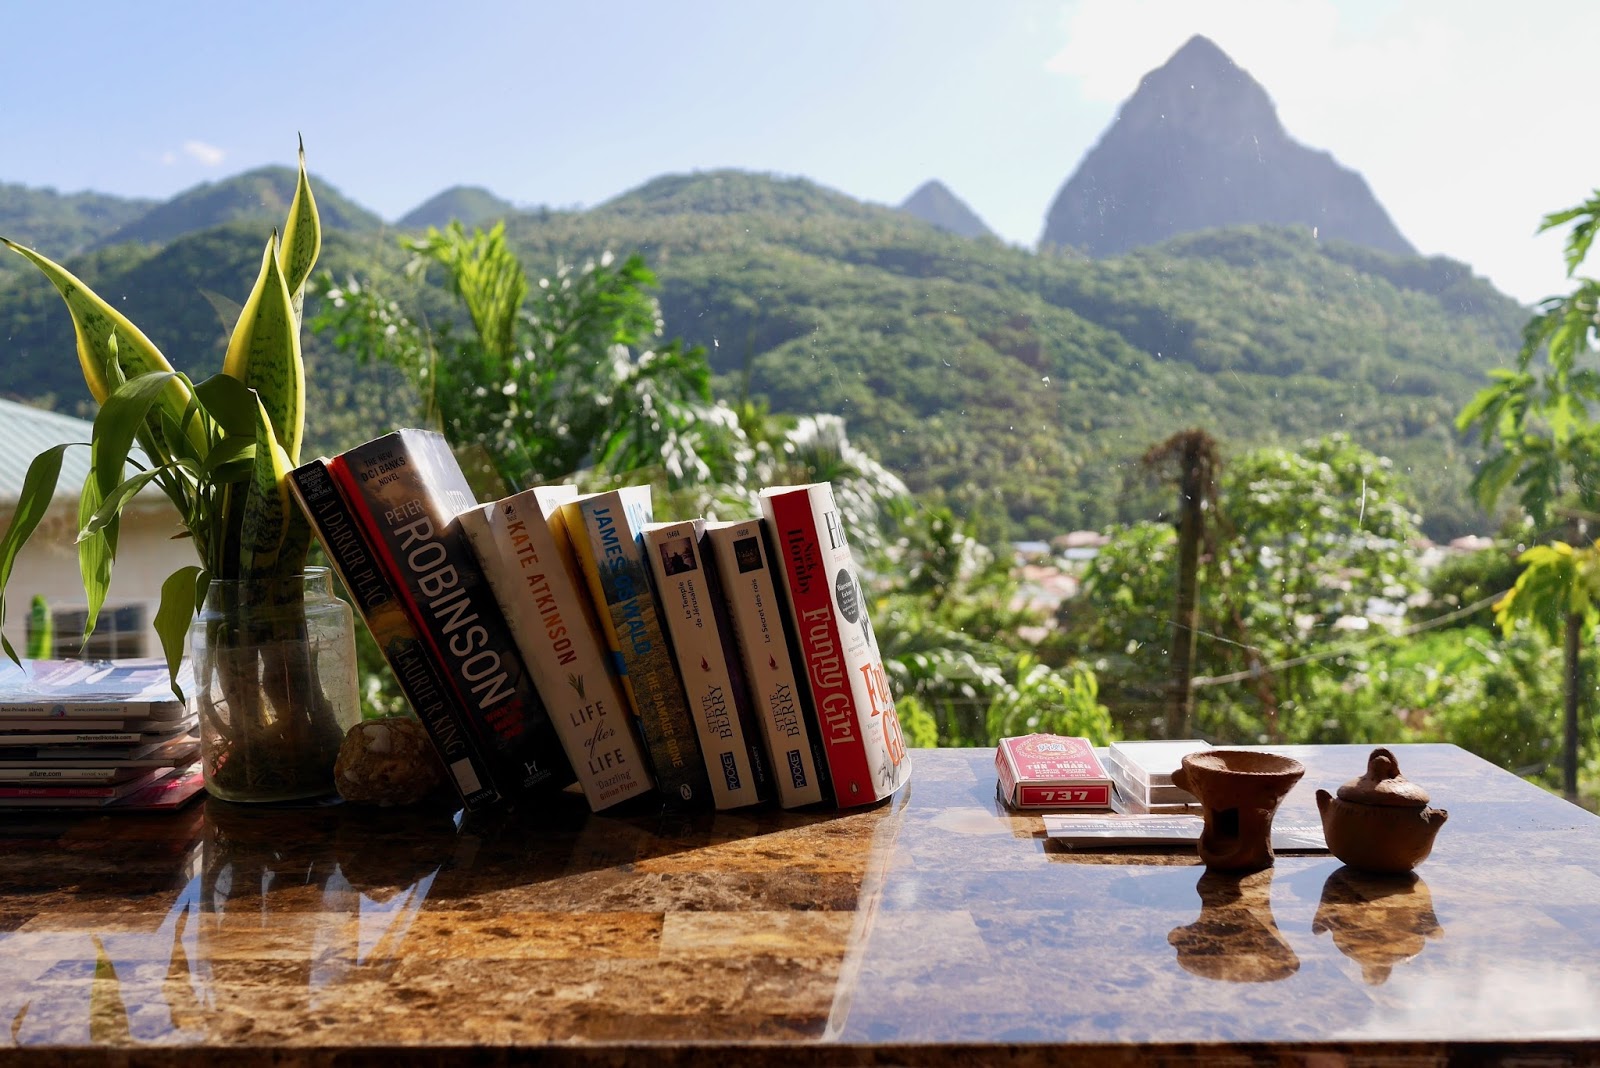 The best airbnb in the world looking onto the Piton Mountains, Soufrière, Saint Lucia, review by www.CalMcTravels.com, Cal McTravels